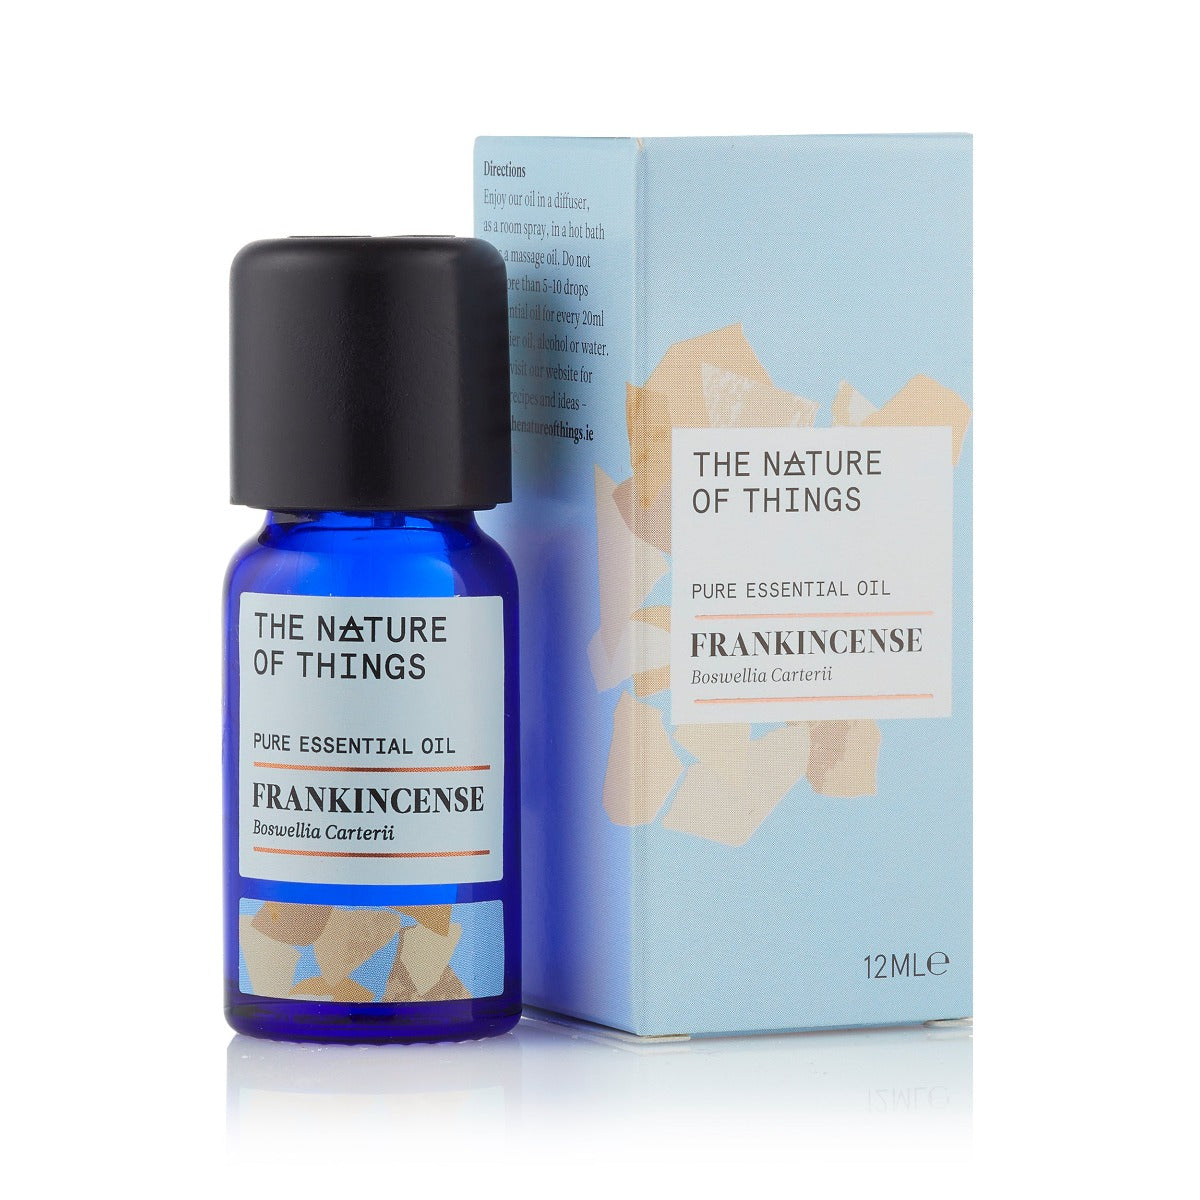 Frankincense Essential Oil from The Nature of Things